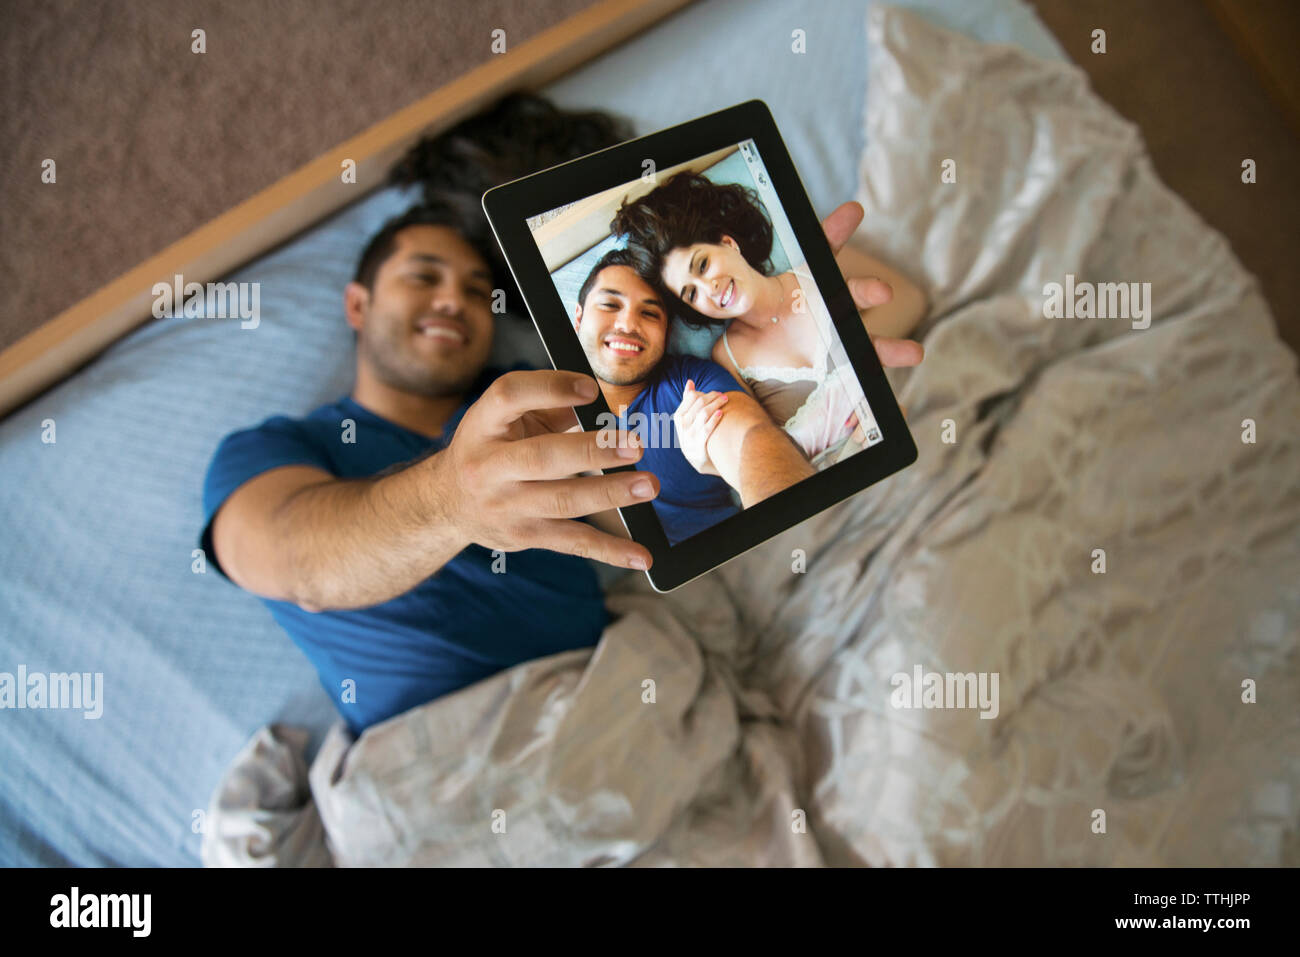 Overhead view of happy couple taking selfie through tablet while lying on bed Stock Photo